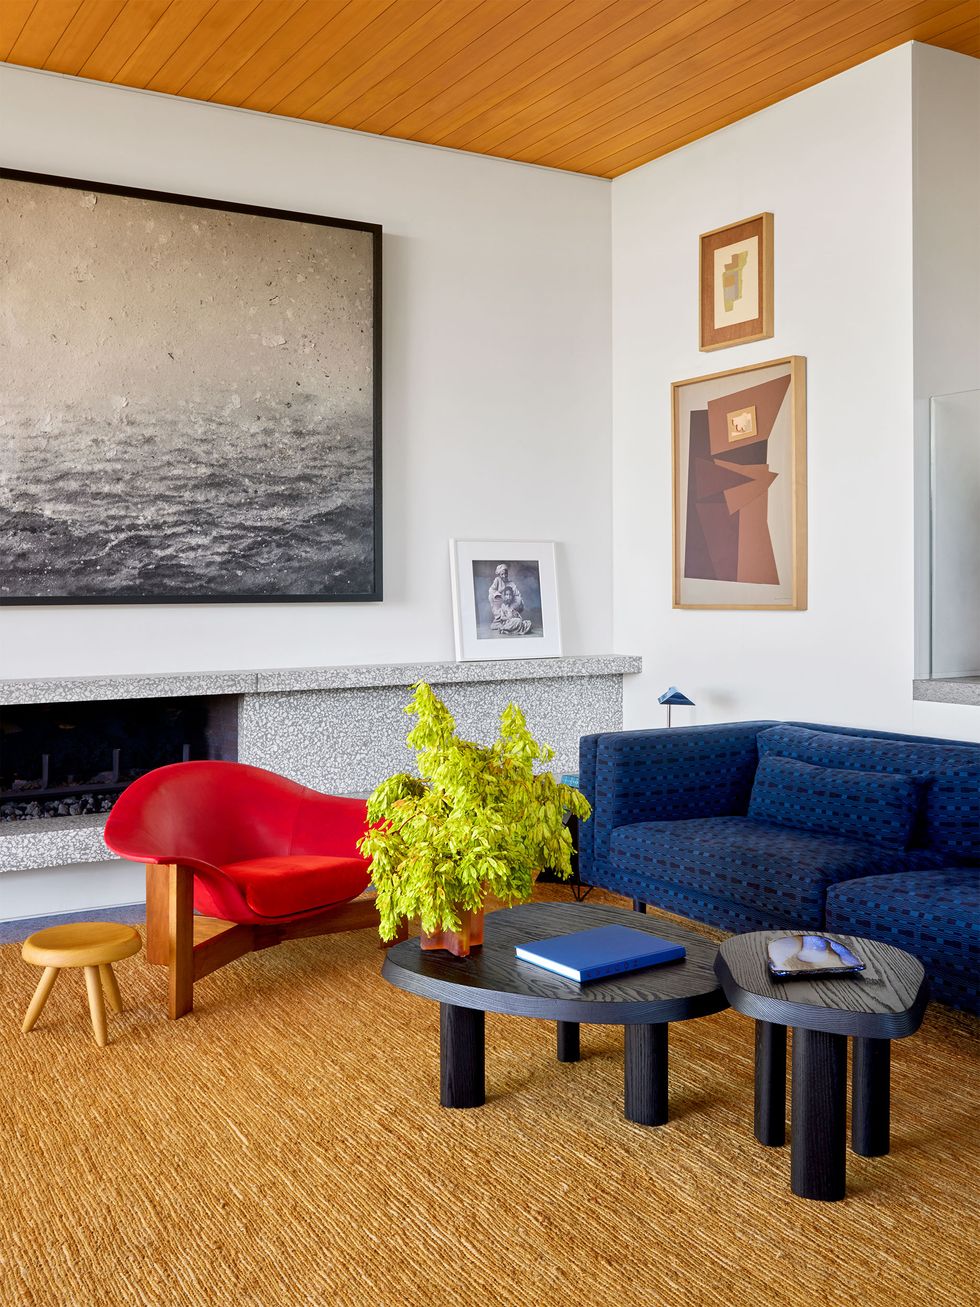 a living room has white walls, a low gray stone fireplace, a jute rug, two three legged cocktail tables of different heights, a modern red armchair with a wood base, a deep blue sofa, and multiple artworks